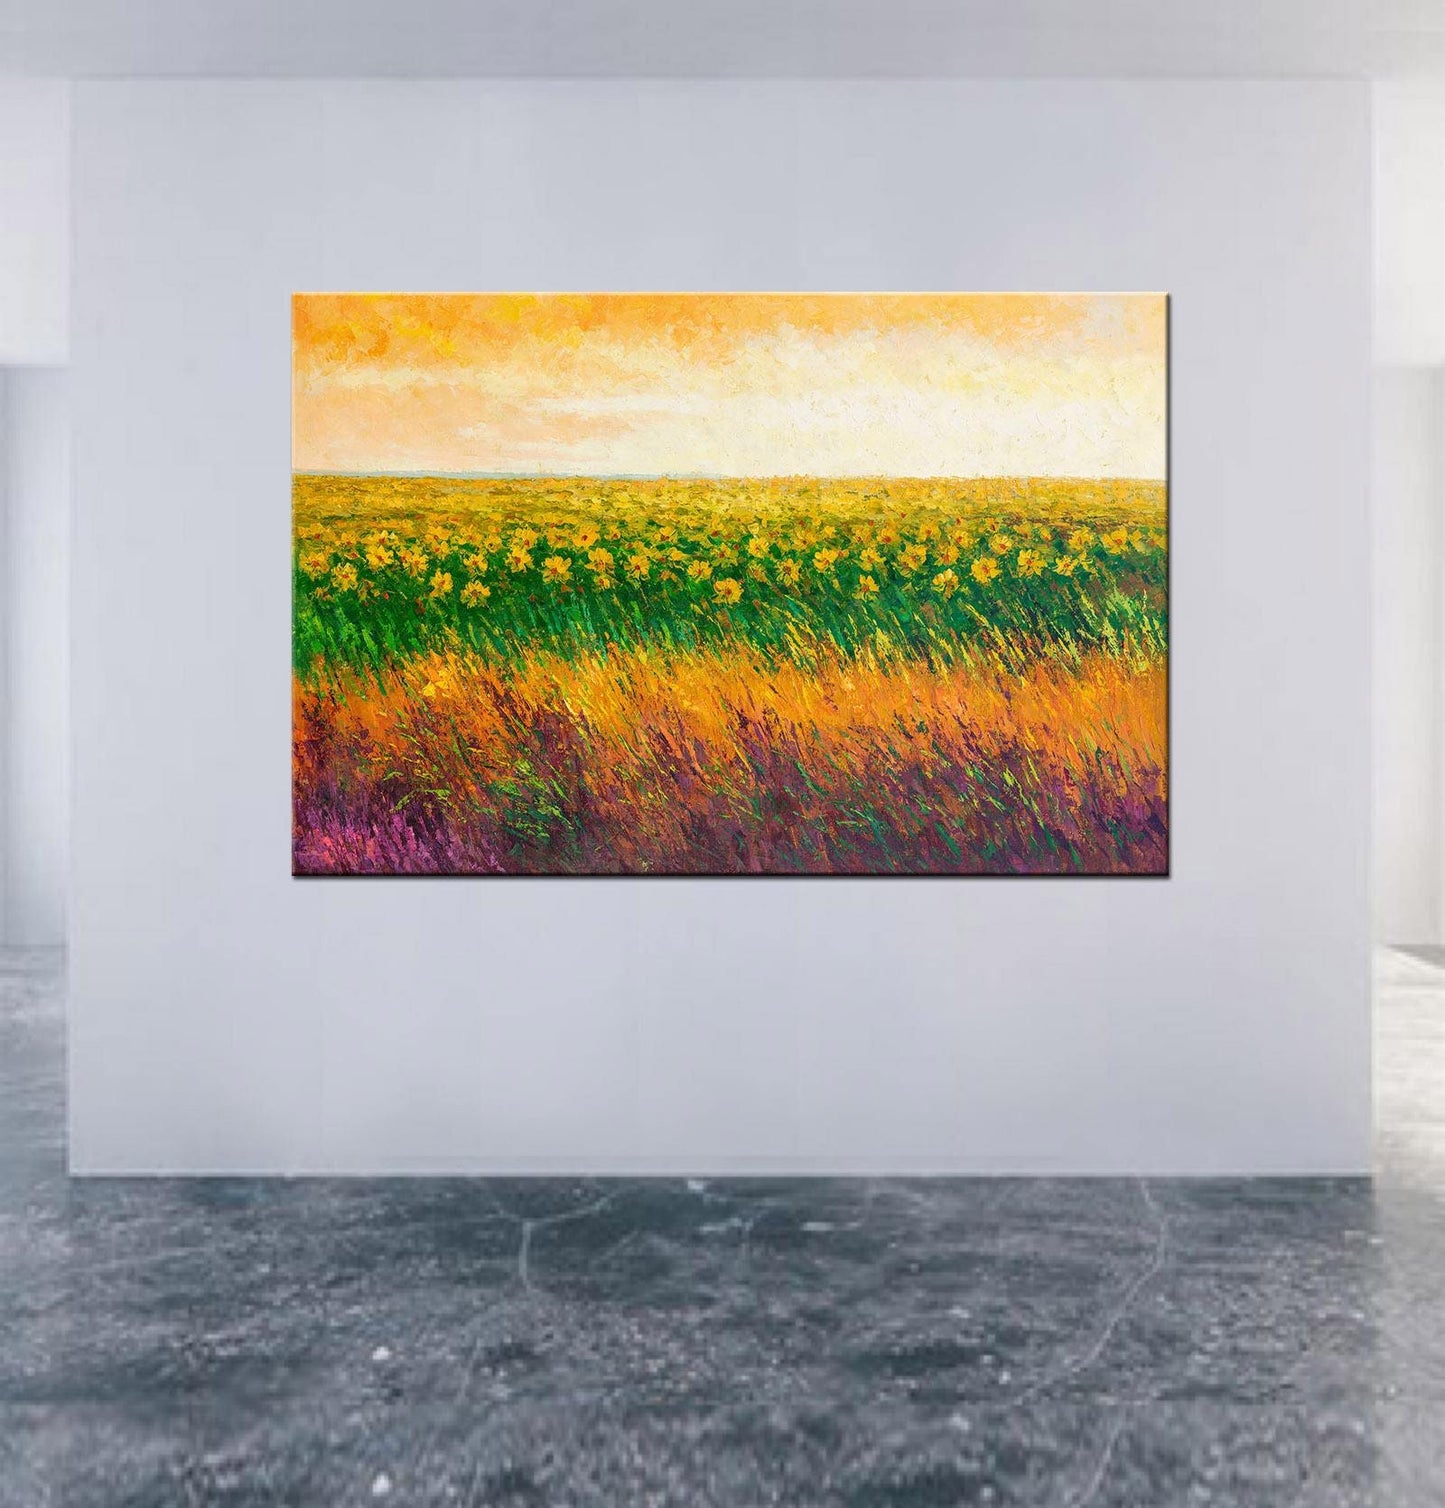 Large Landscape Oil Painting Spring Fields With Flowers - Add a Splash of Color to Your Space with an Oversized Landscape Oil Painting